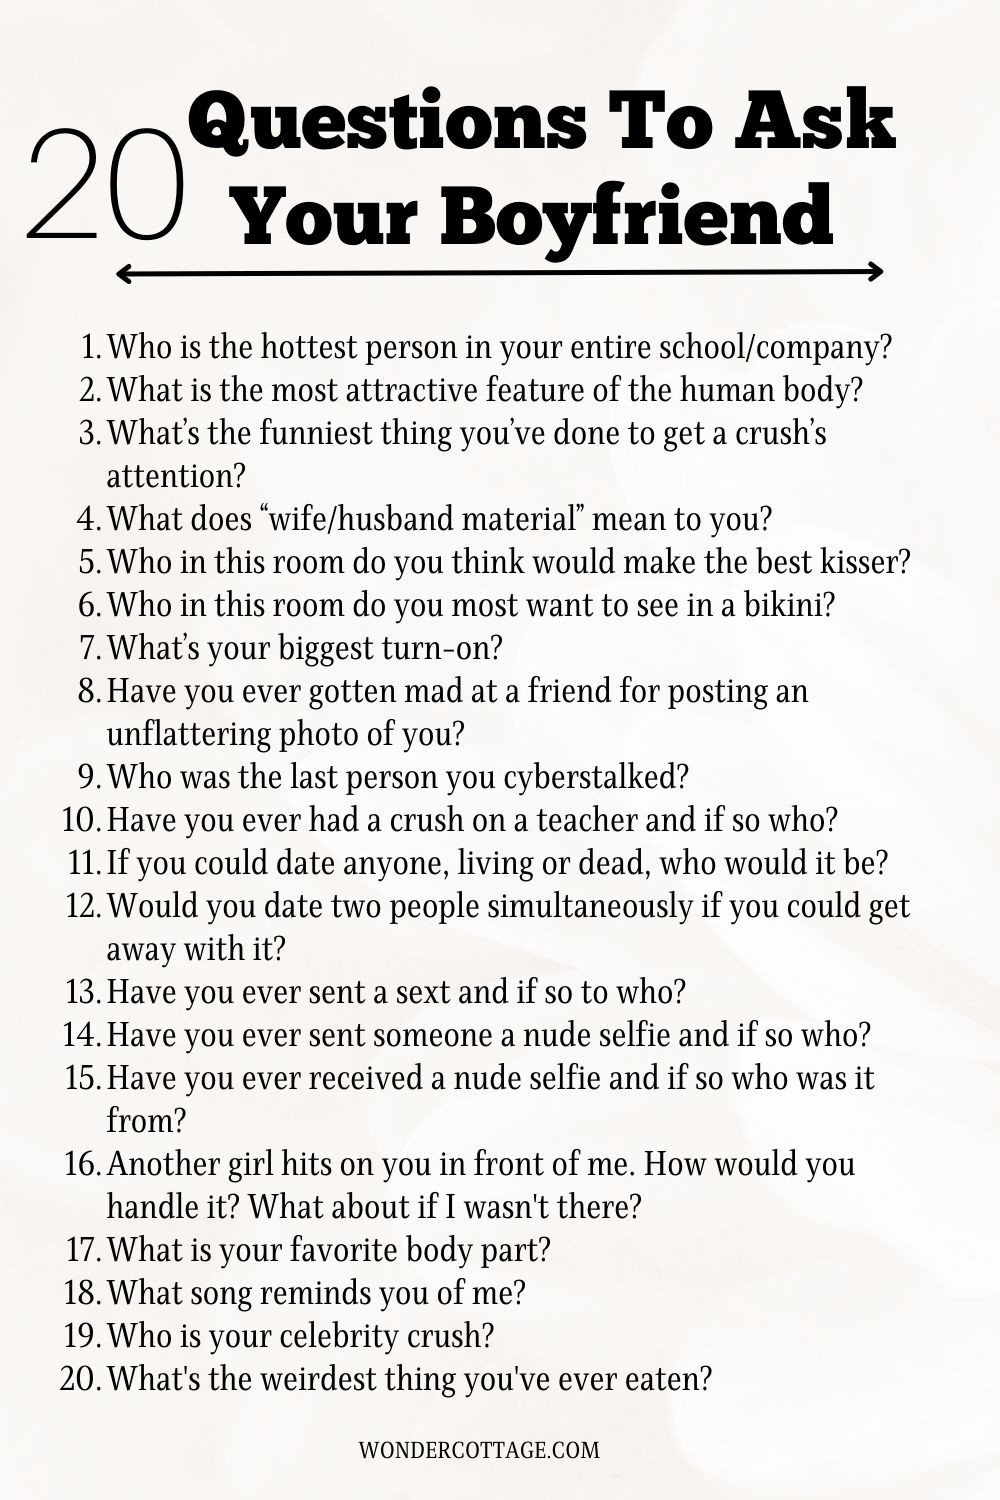 20 Questions To Ask Your Boyfriend 